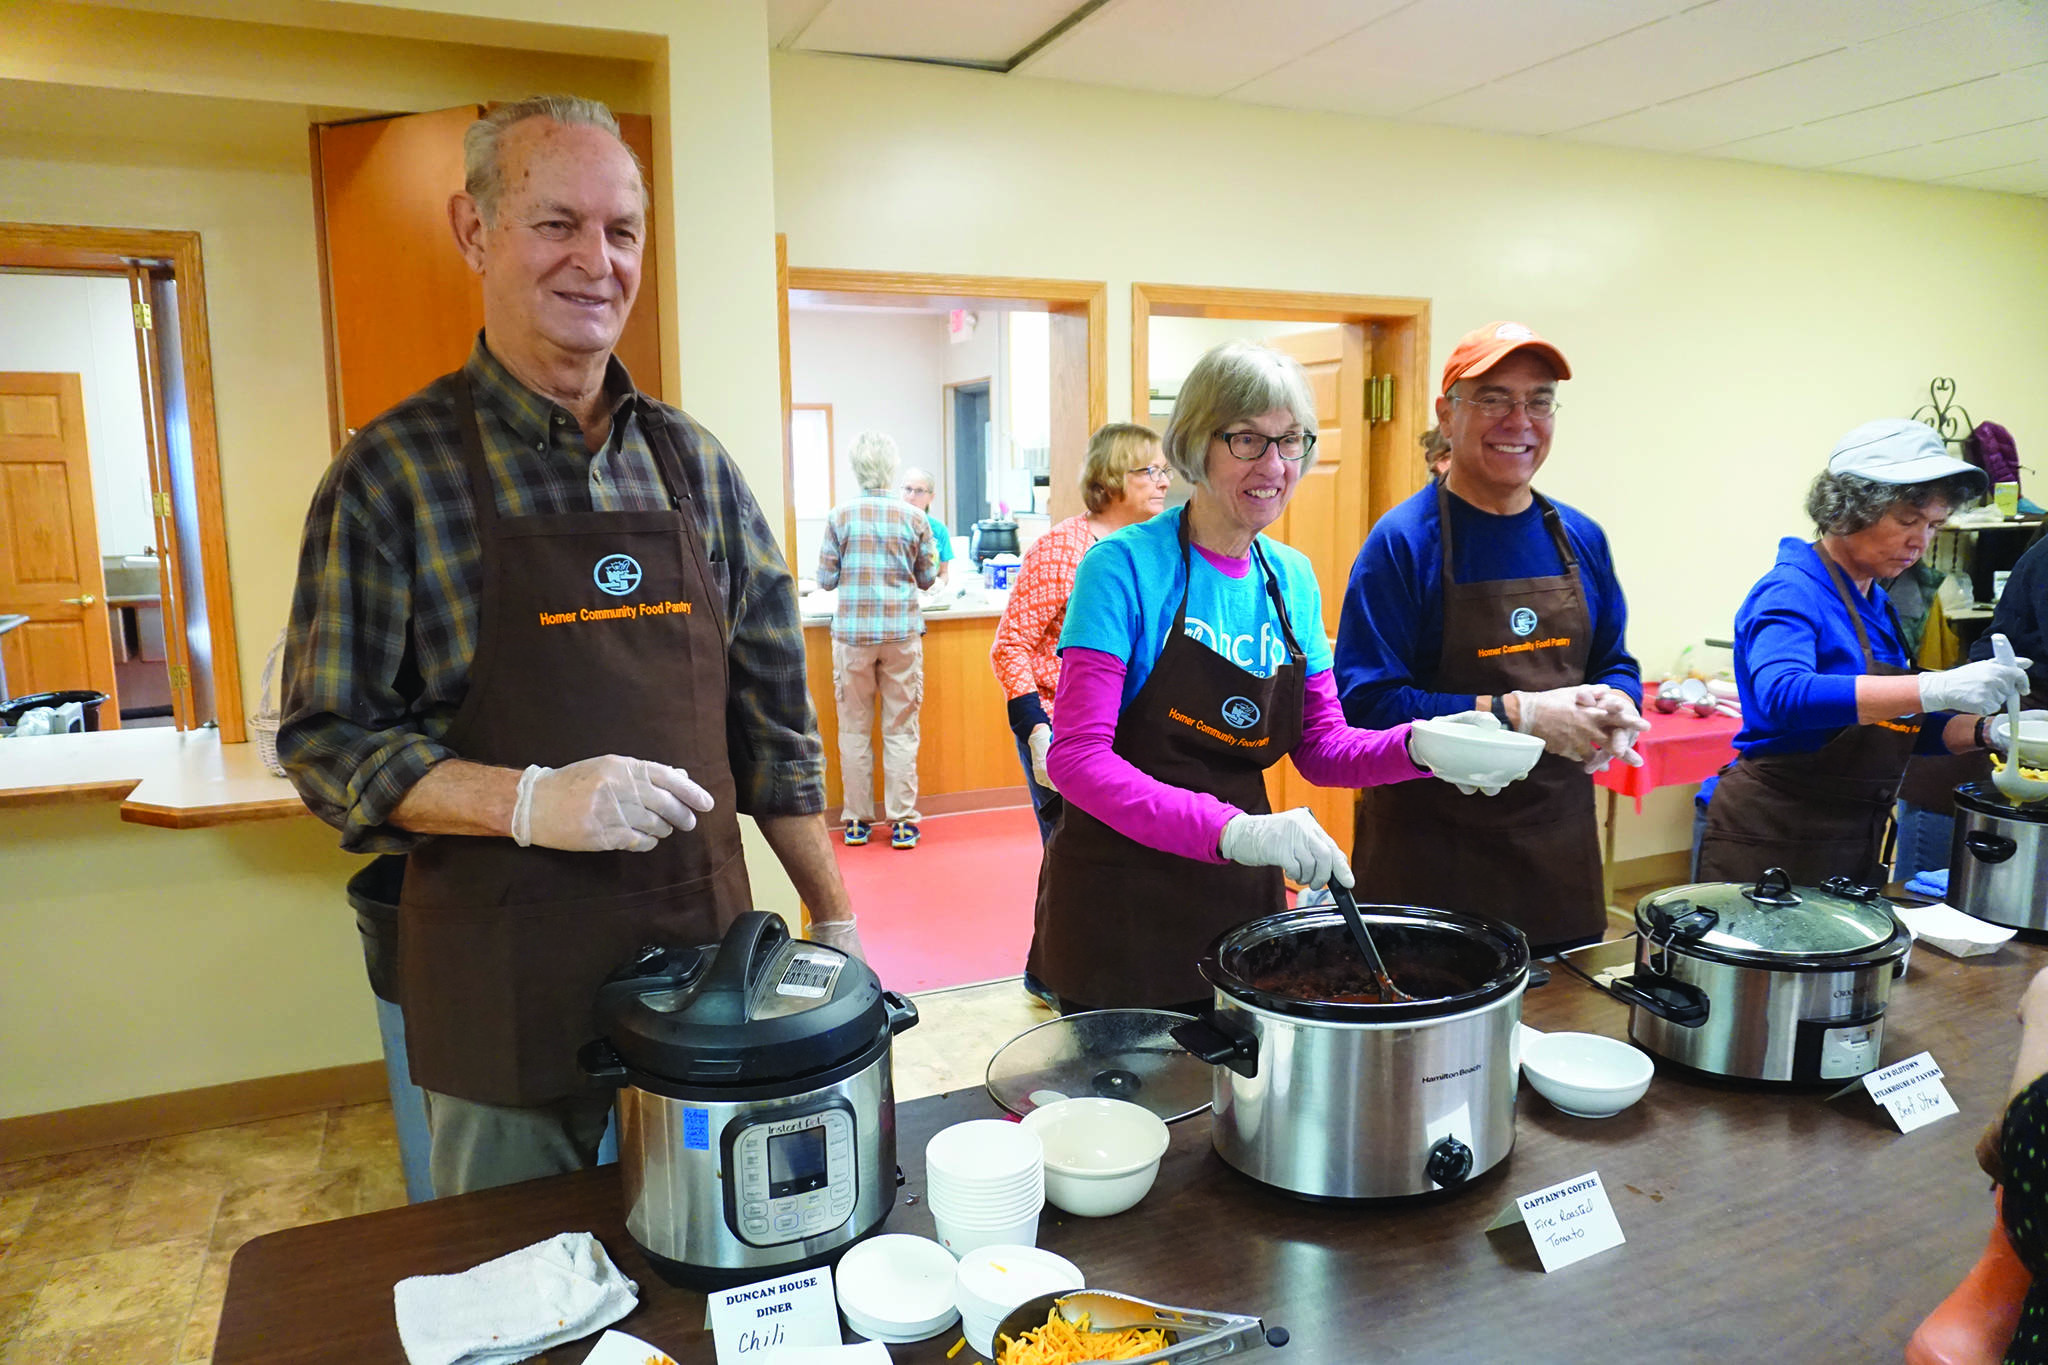 From left to right, Wim Steenbakkers, Deb Smith and Ray Quintana serve soup at the annual Homer Community Food Pantry’s Empty Bowls fundraiser on Friday, Nov. 8, 2019, at Homer United Methodist Church in Homer, Alaska. Quintana was visiting from Albuquerque, New Mexico, and volunteered his time during this stay. (Photo by Michael Armstrong/Homer News)